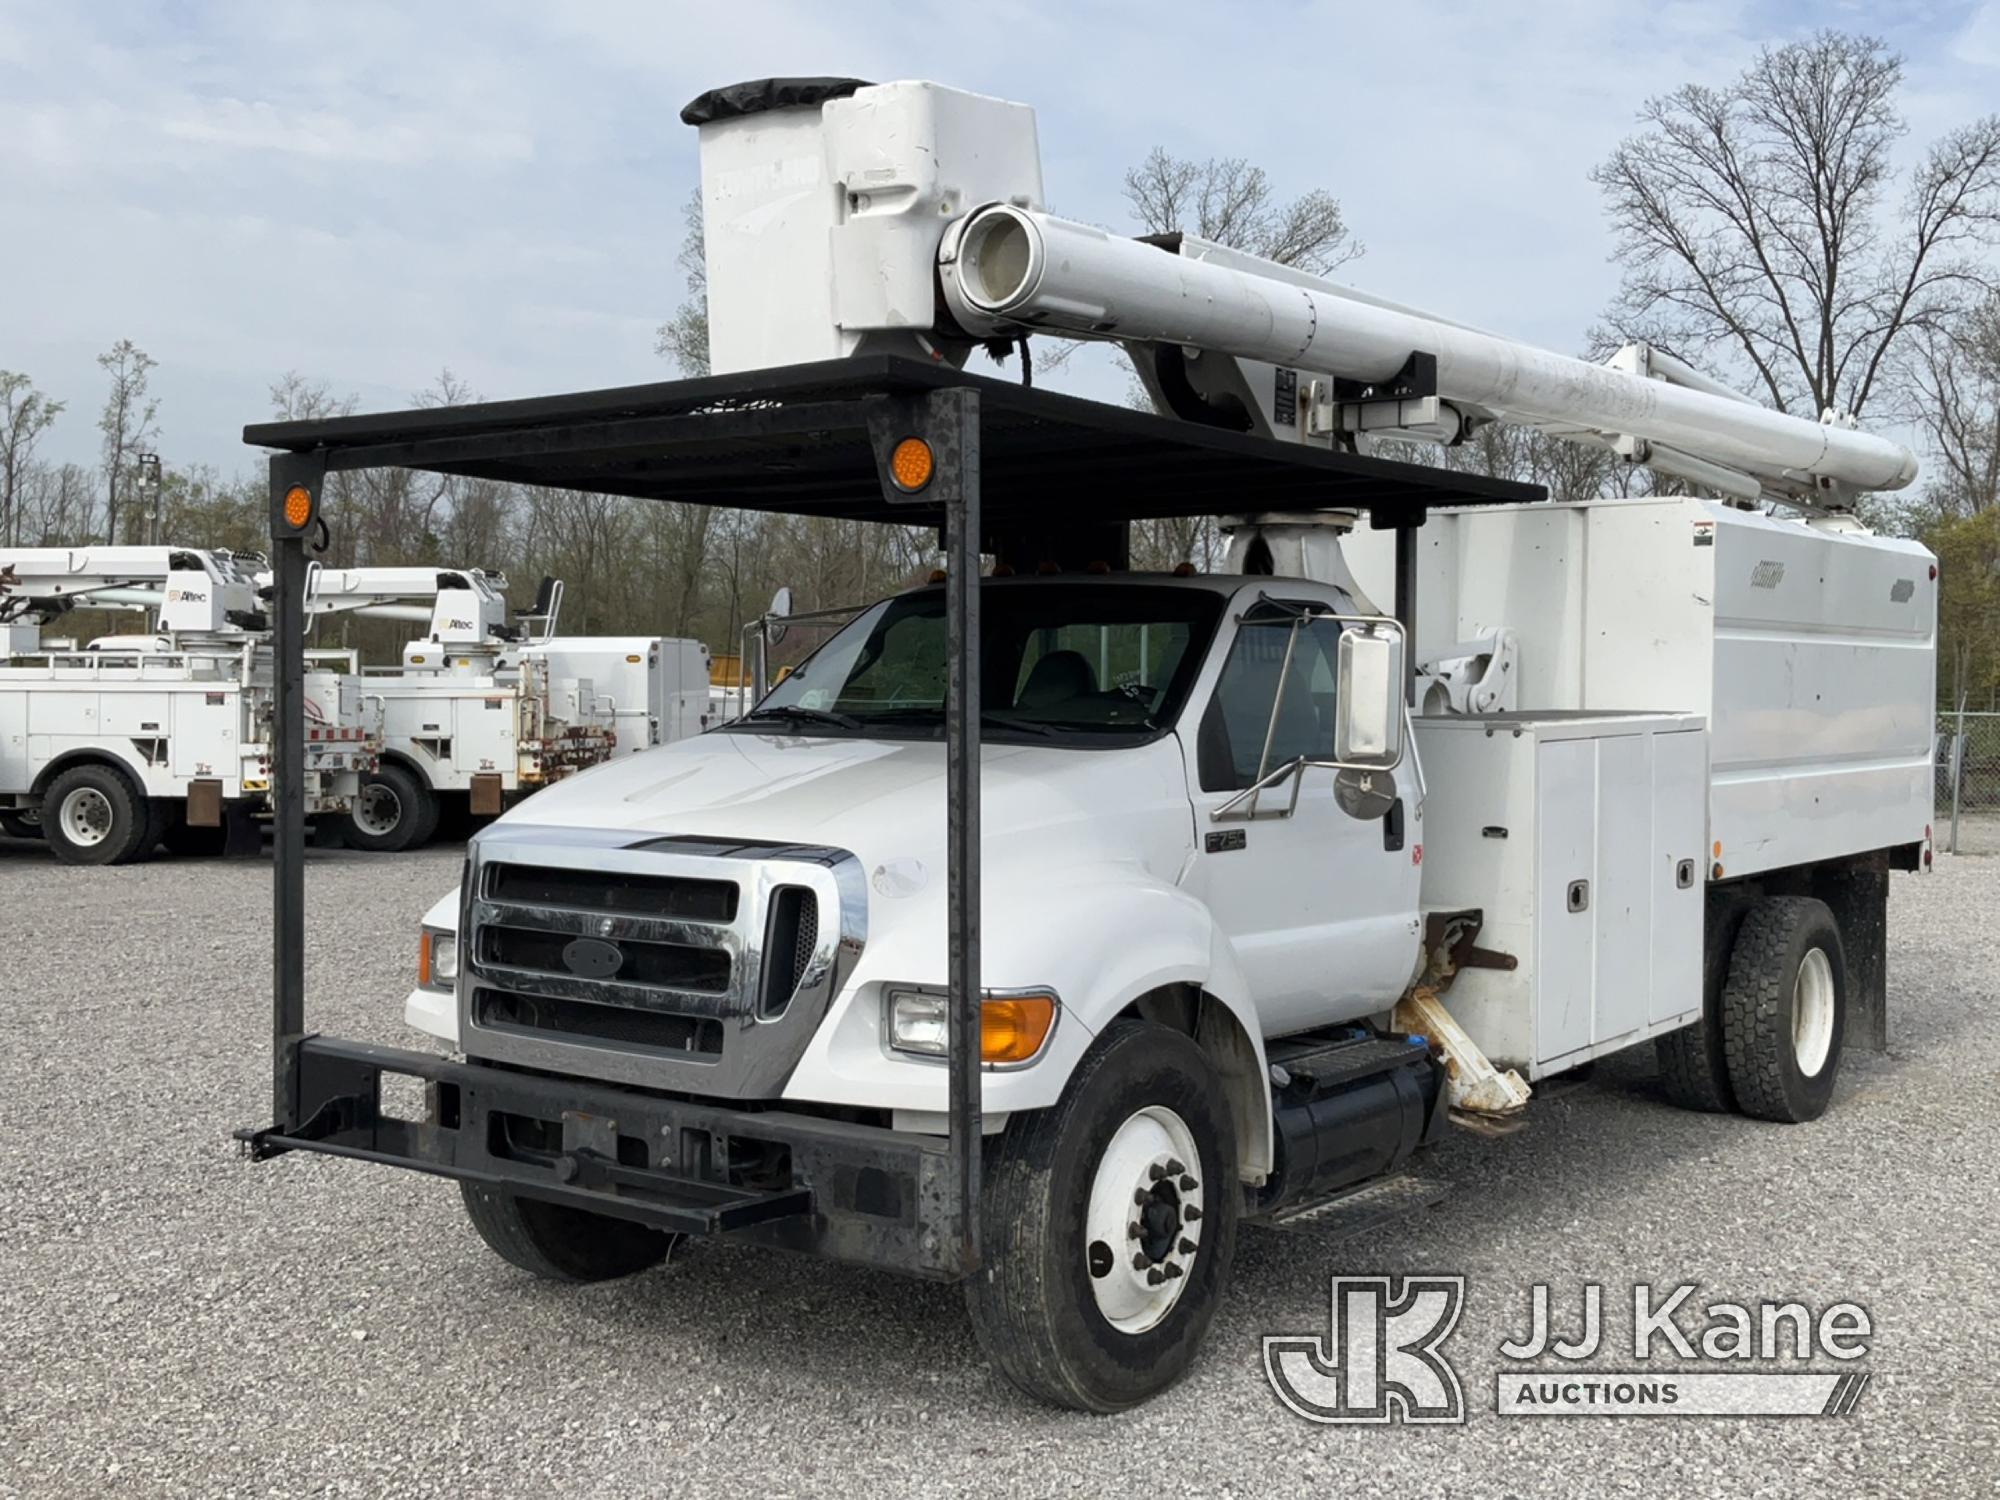 (Verona, KY) Altec LR760-E70, Over-Center Elevator Bucket Truck mounted behind cab on 2012 Ford F750